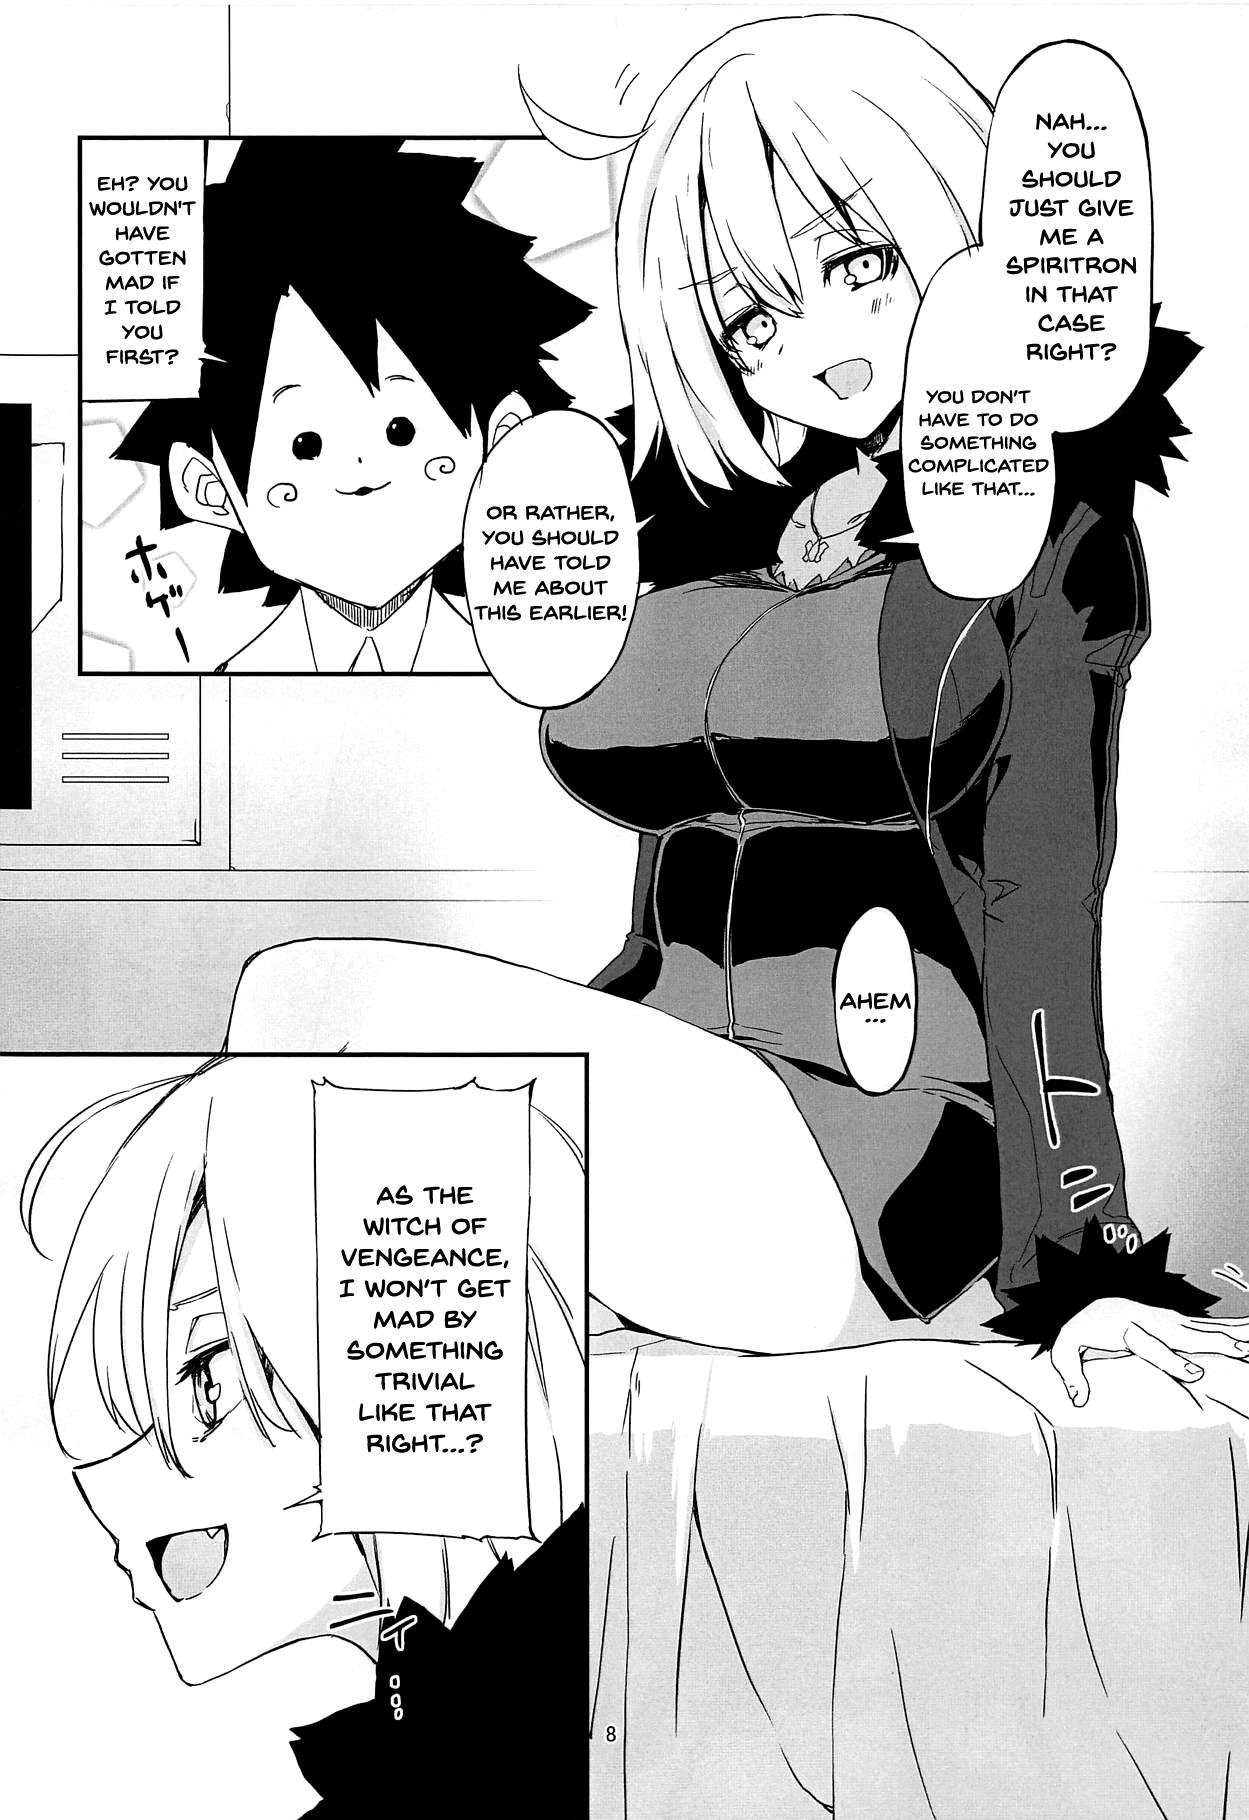 Spy Cam Uchi no Alter wa Choroi | Our Alter Is So Easy - Fate grand order Teenporno - Page 6